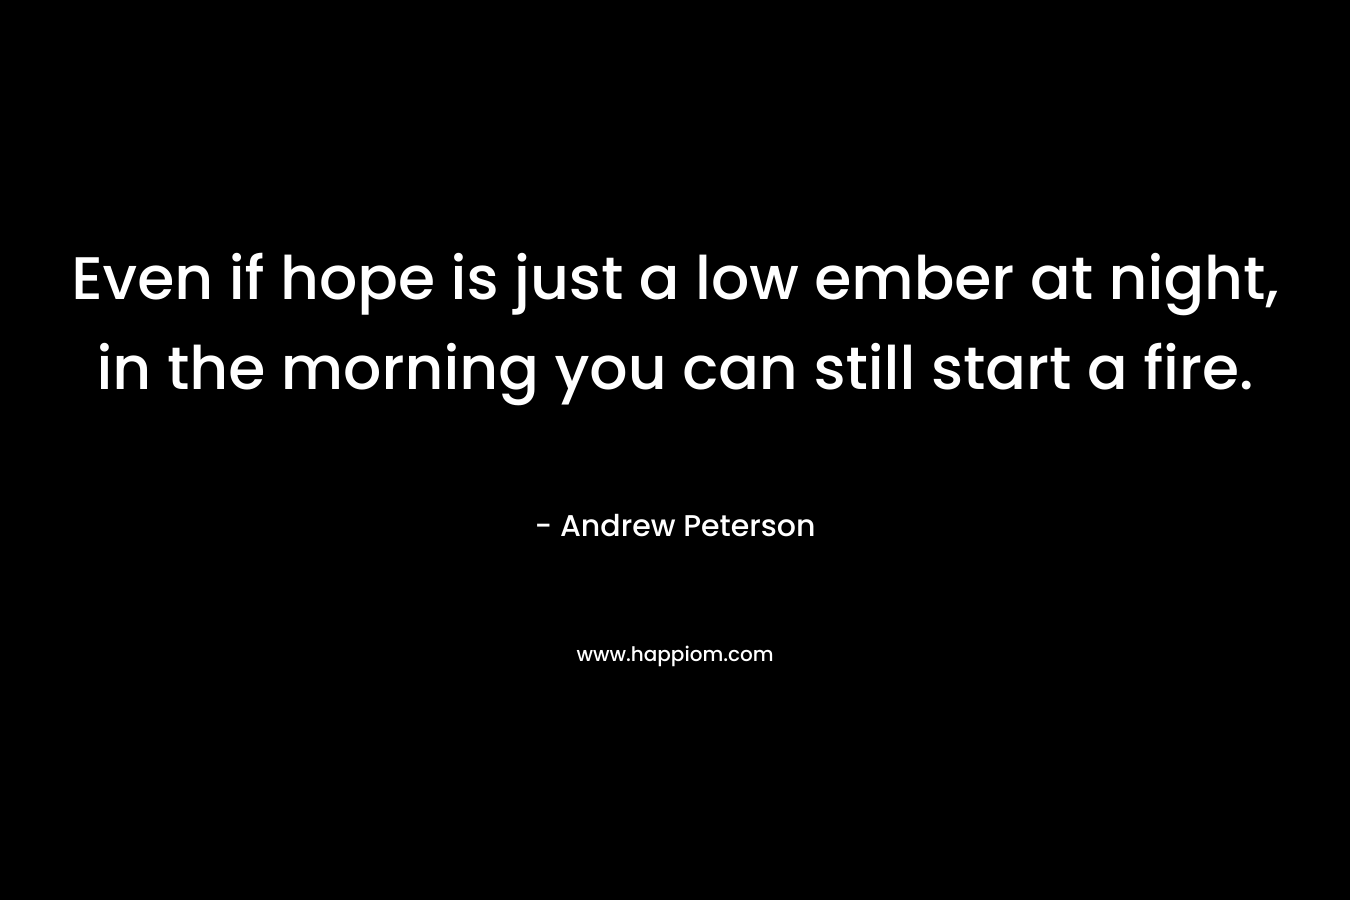 Even if hope is just a low ember at night, in the morning you can still start a fire. – Andrew Peterson